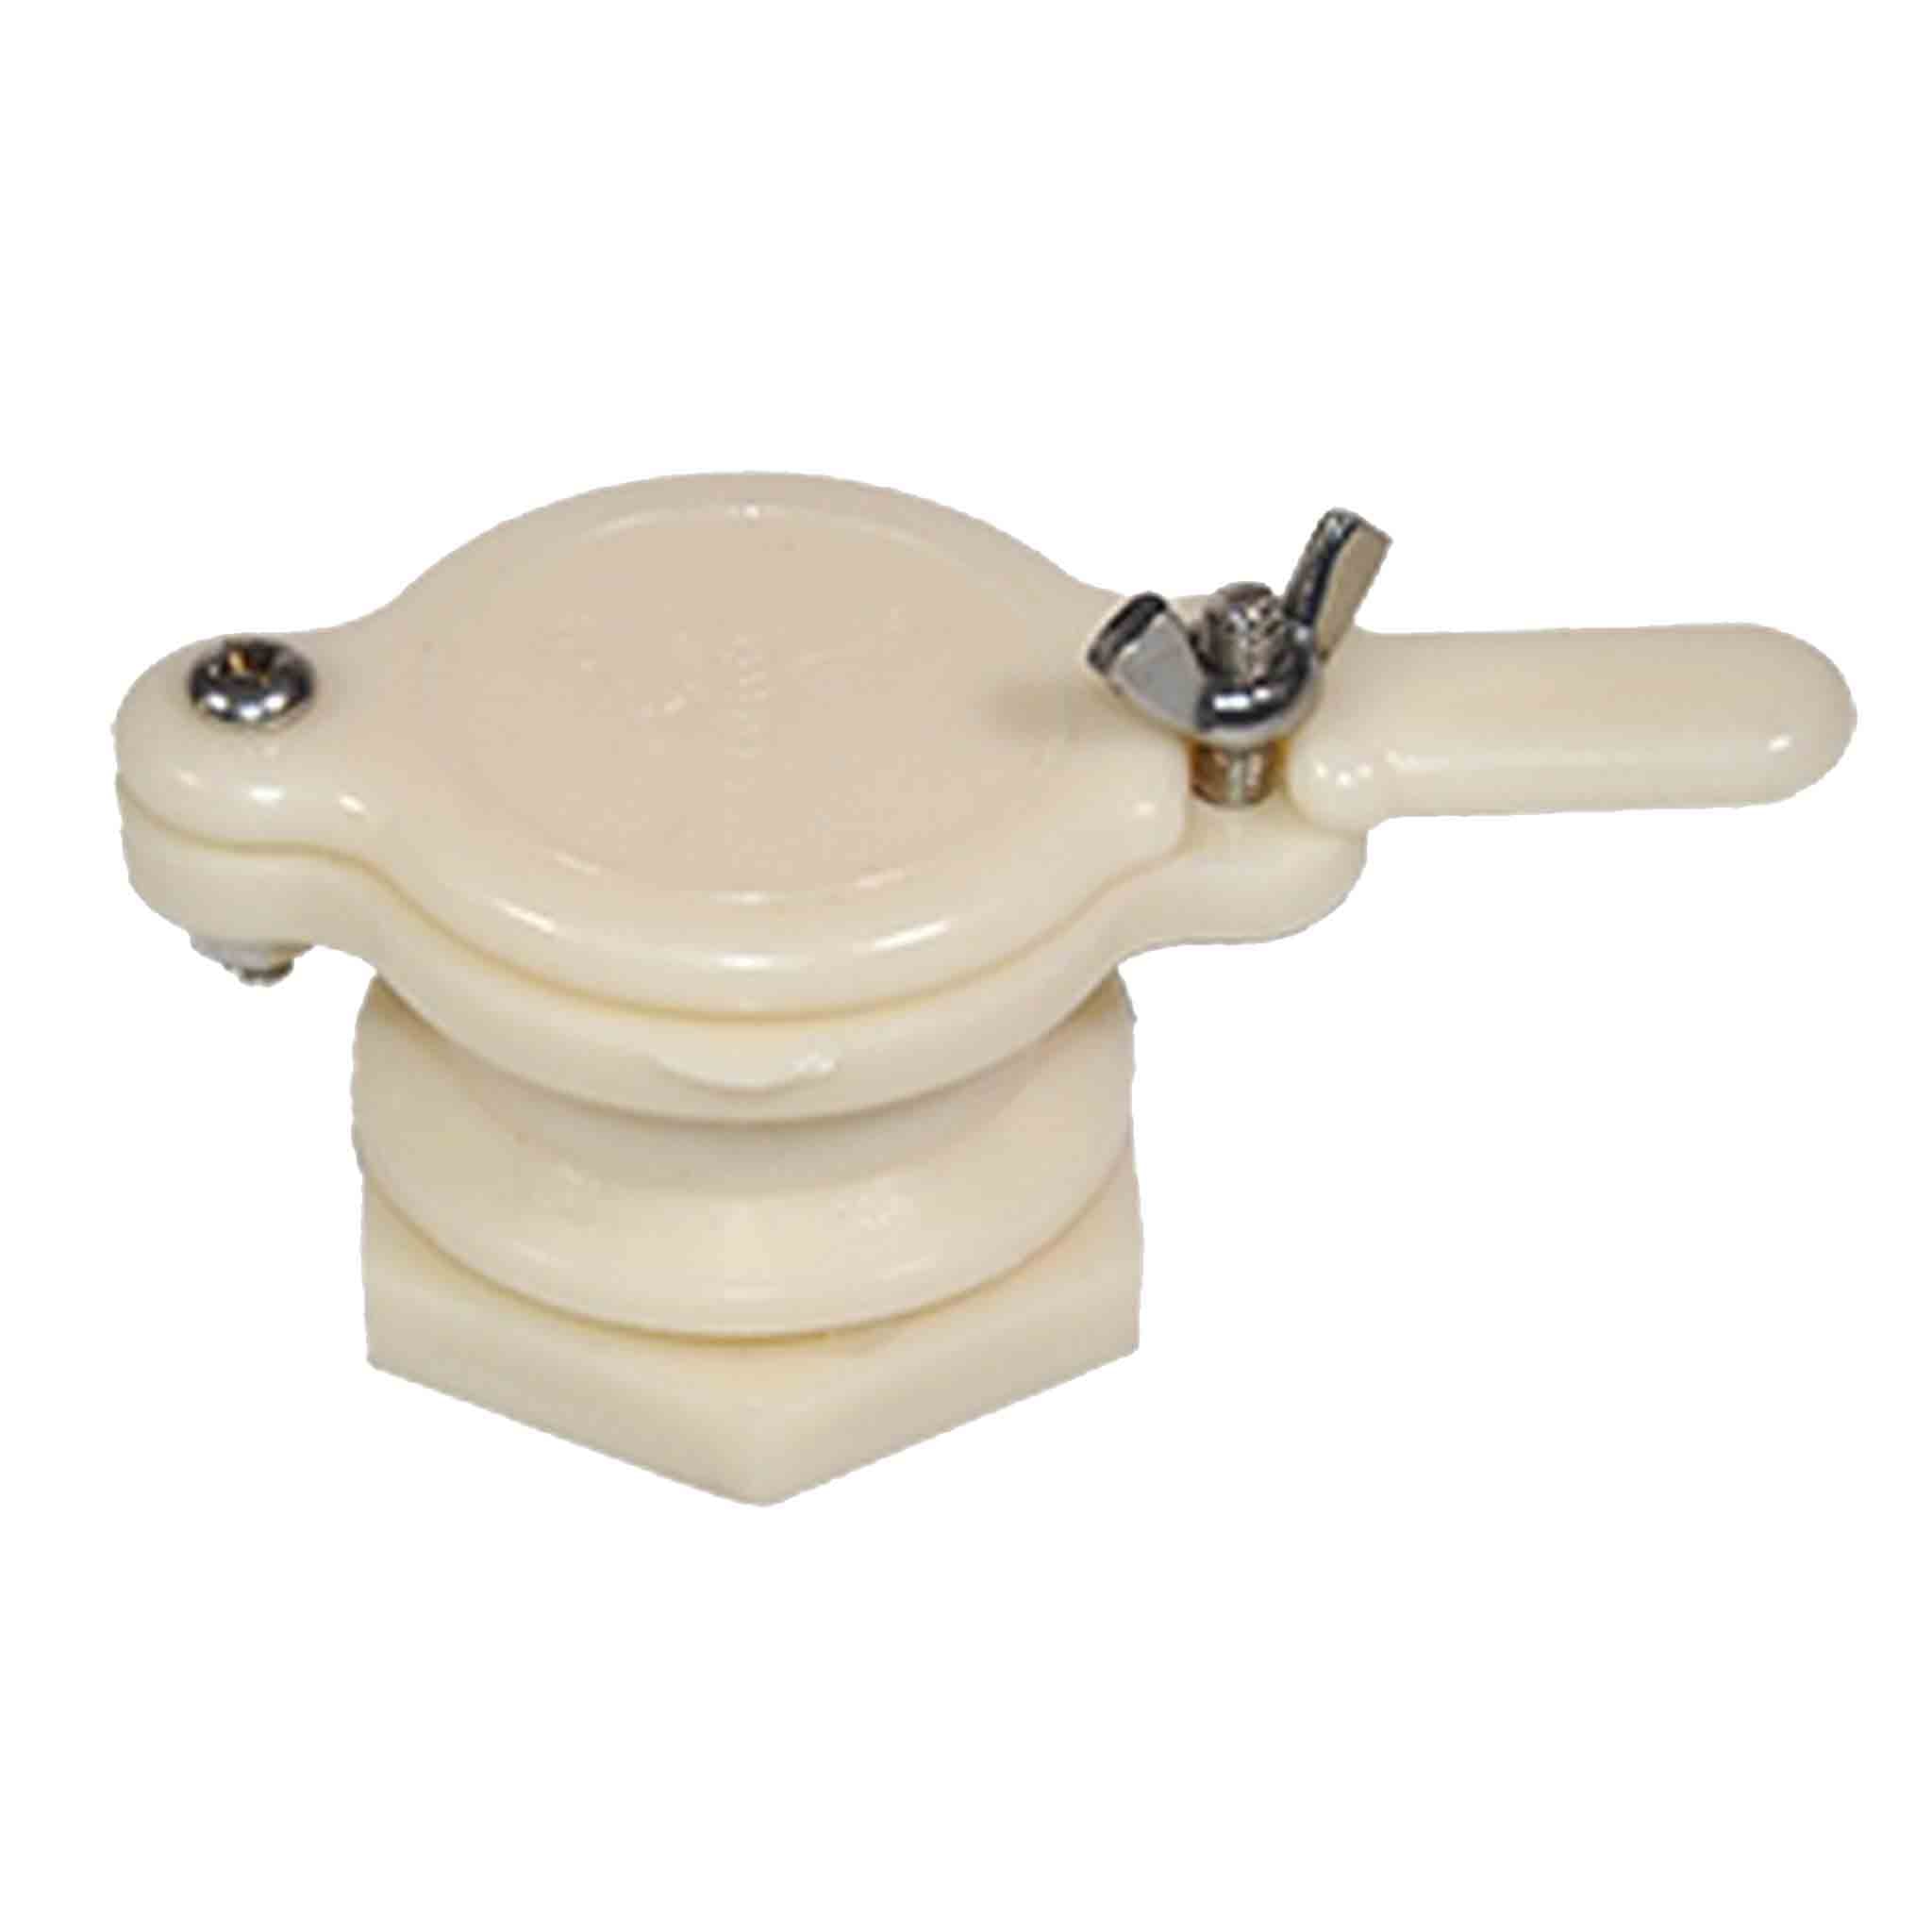 Nylon Pouring Tap/Honey Gate for Honey (2 Pack) - Processing collection by Buzzbee Beekeeping Supplies